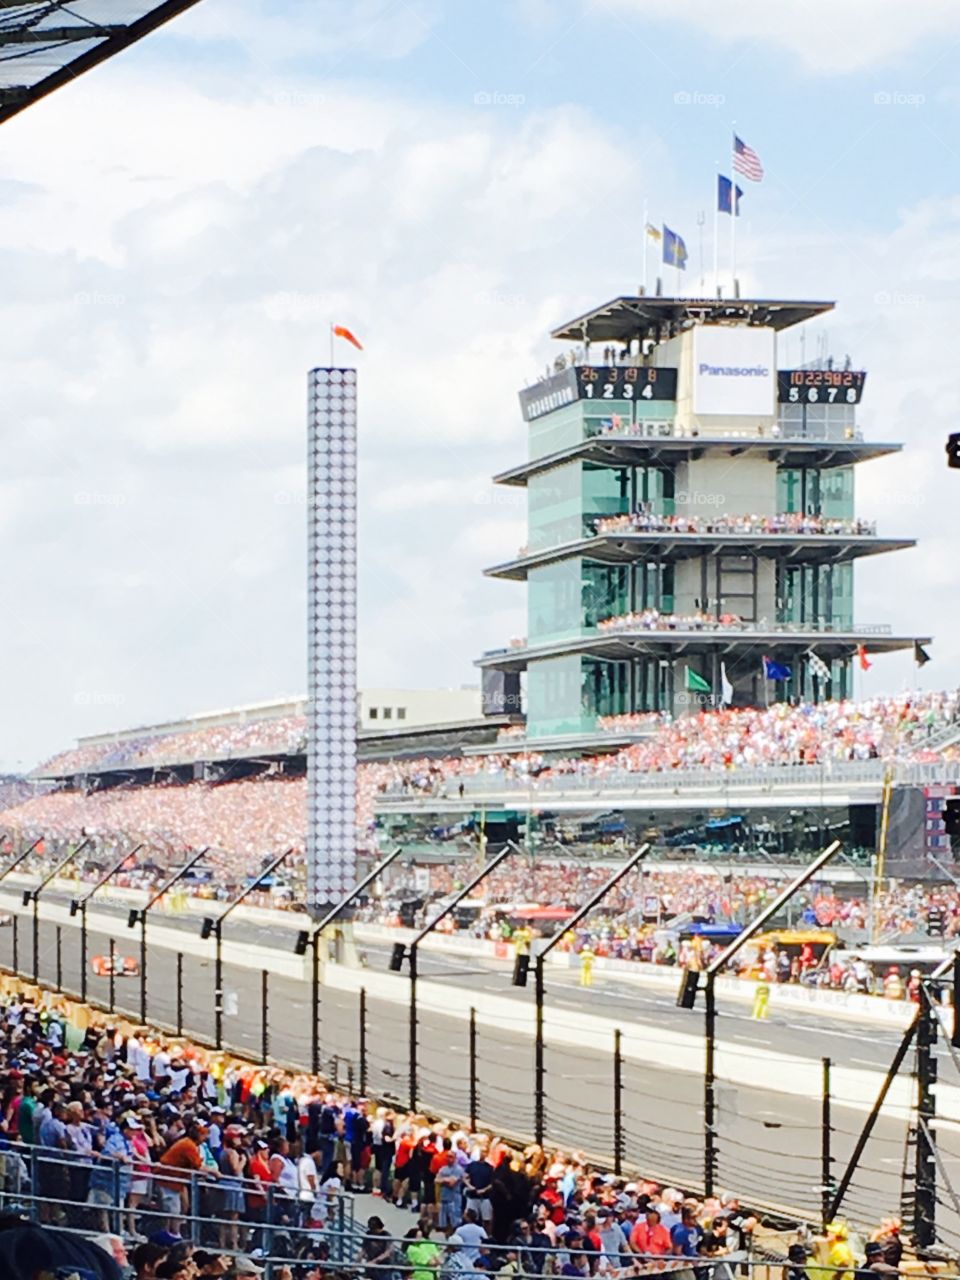 Indianapolis 500 White Flag End of the Race 2017.